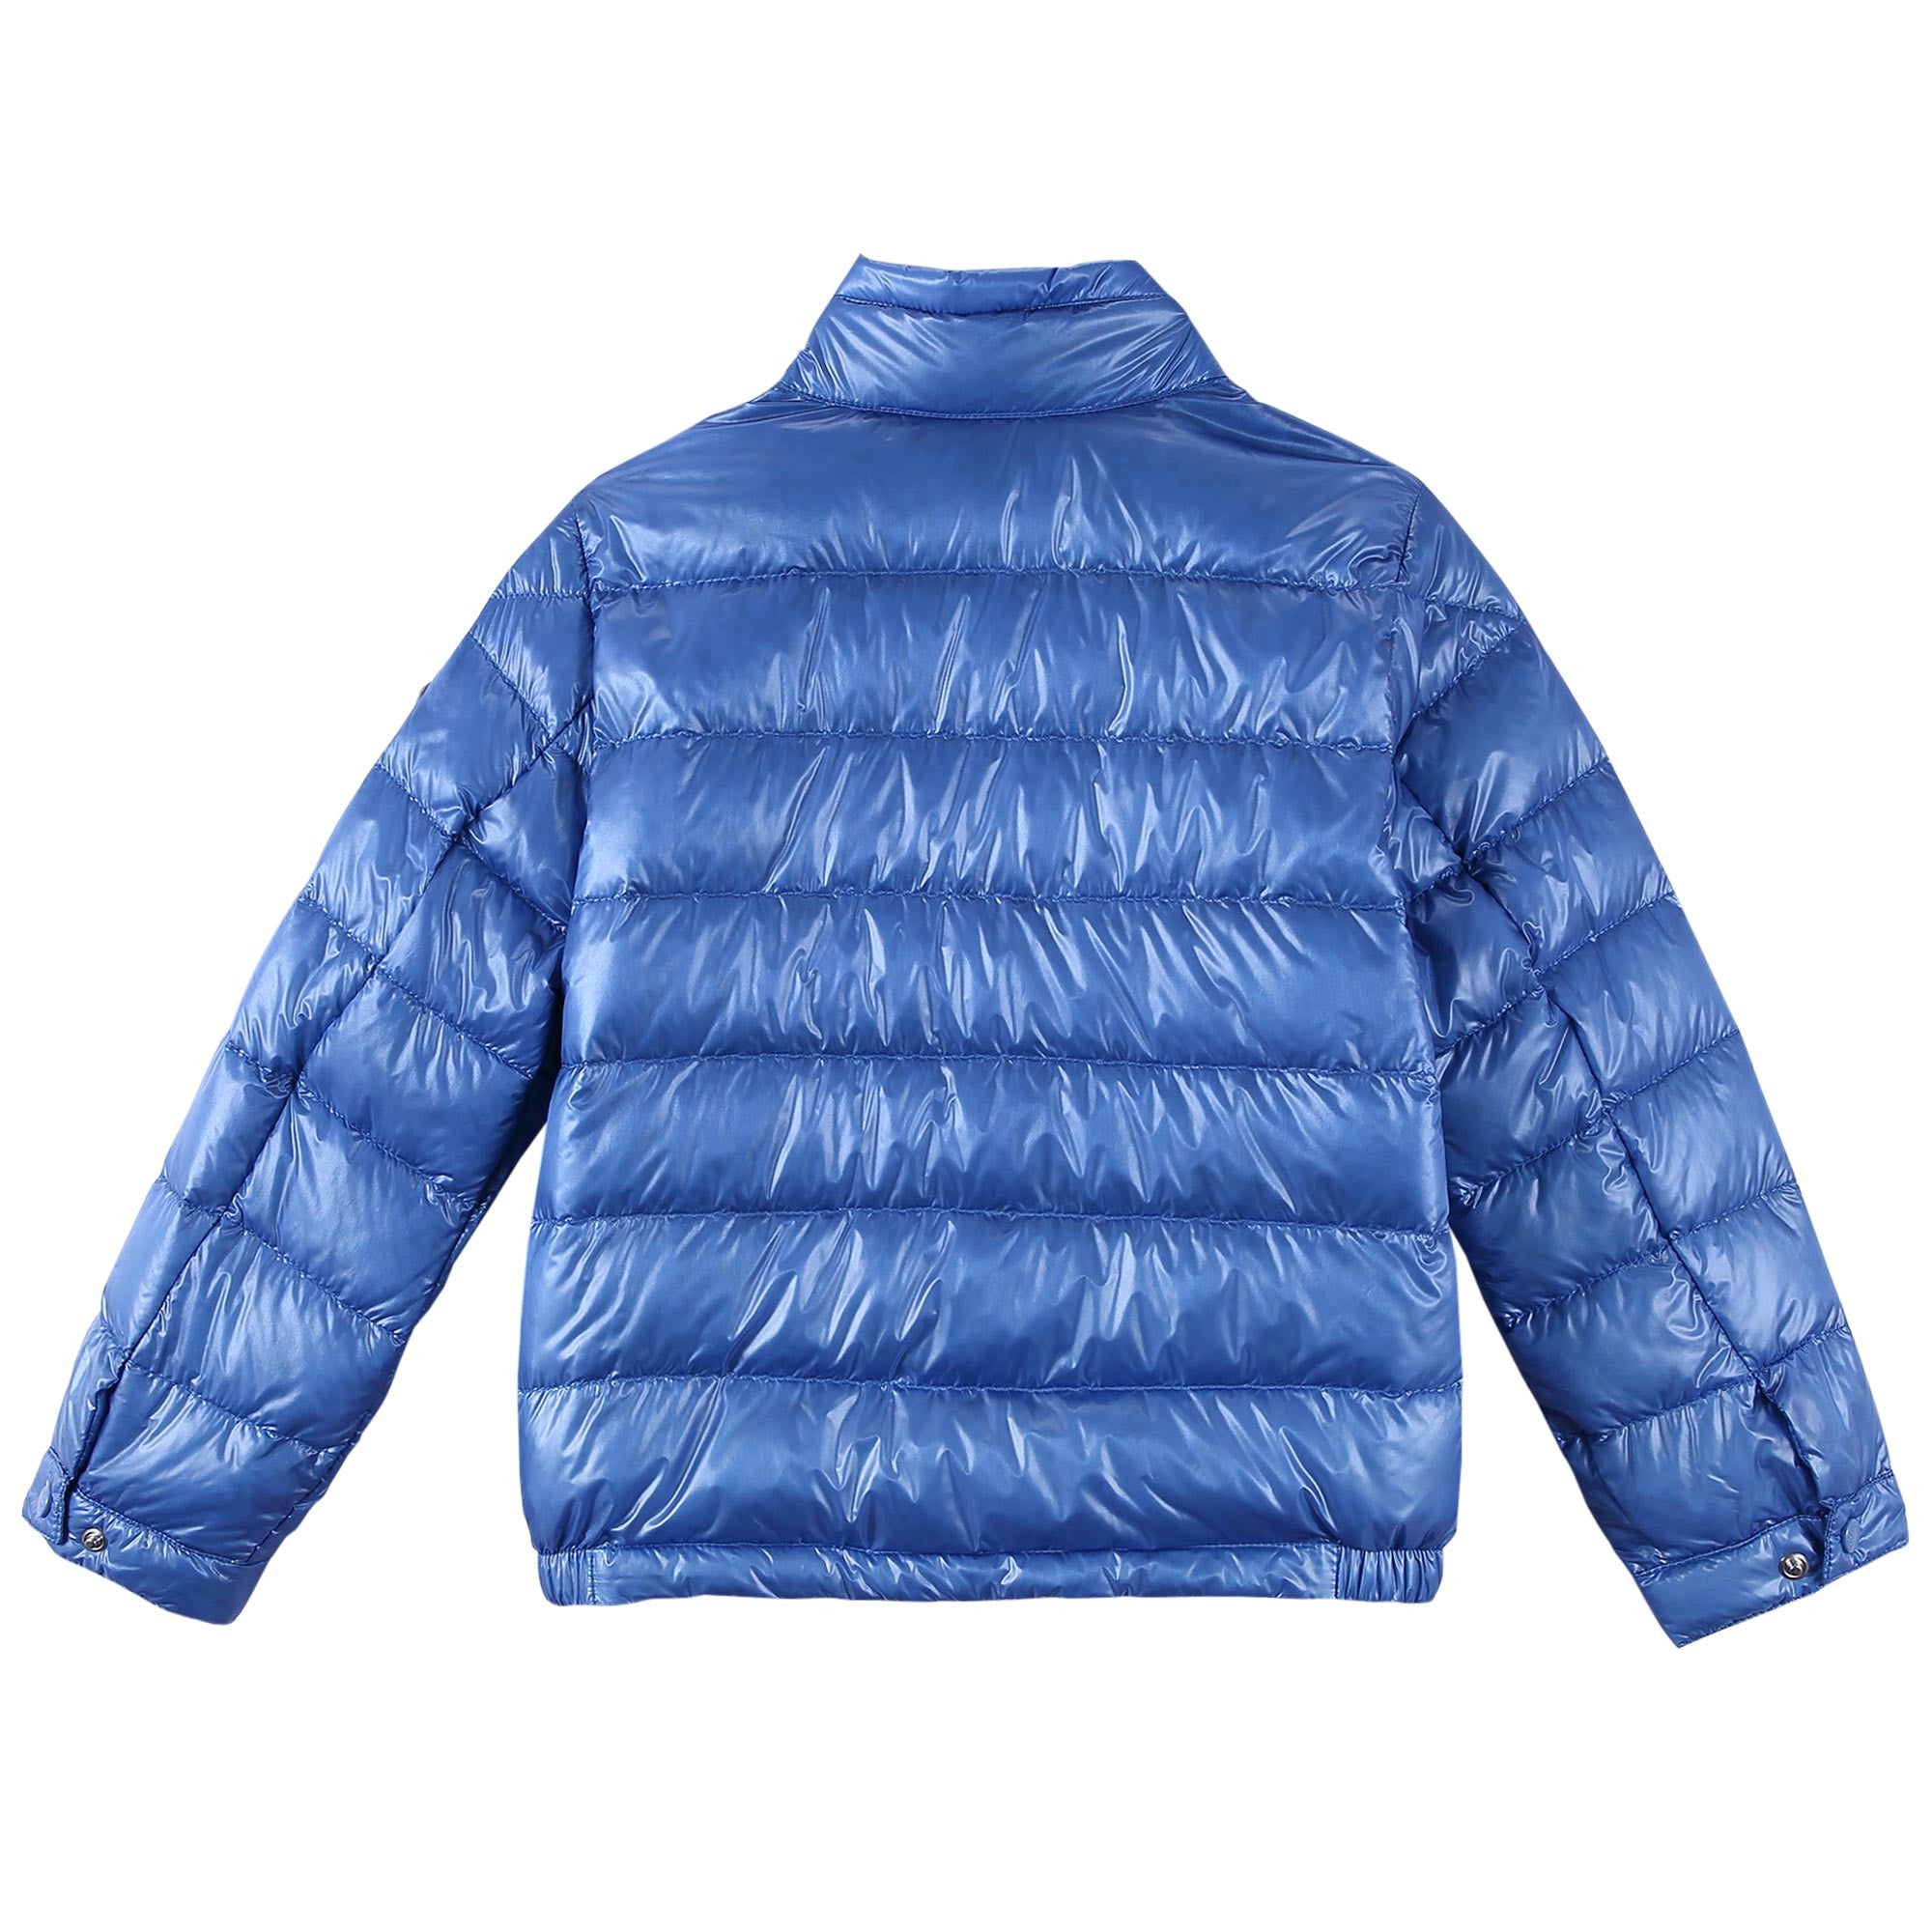 Boys Blue Down Padded 'Acrous' Jacket With Hidden Pocket - CÉMAROSE | Children's Fashion Store - 2